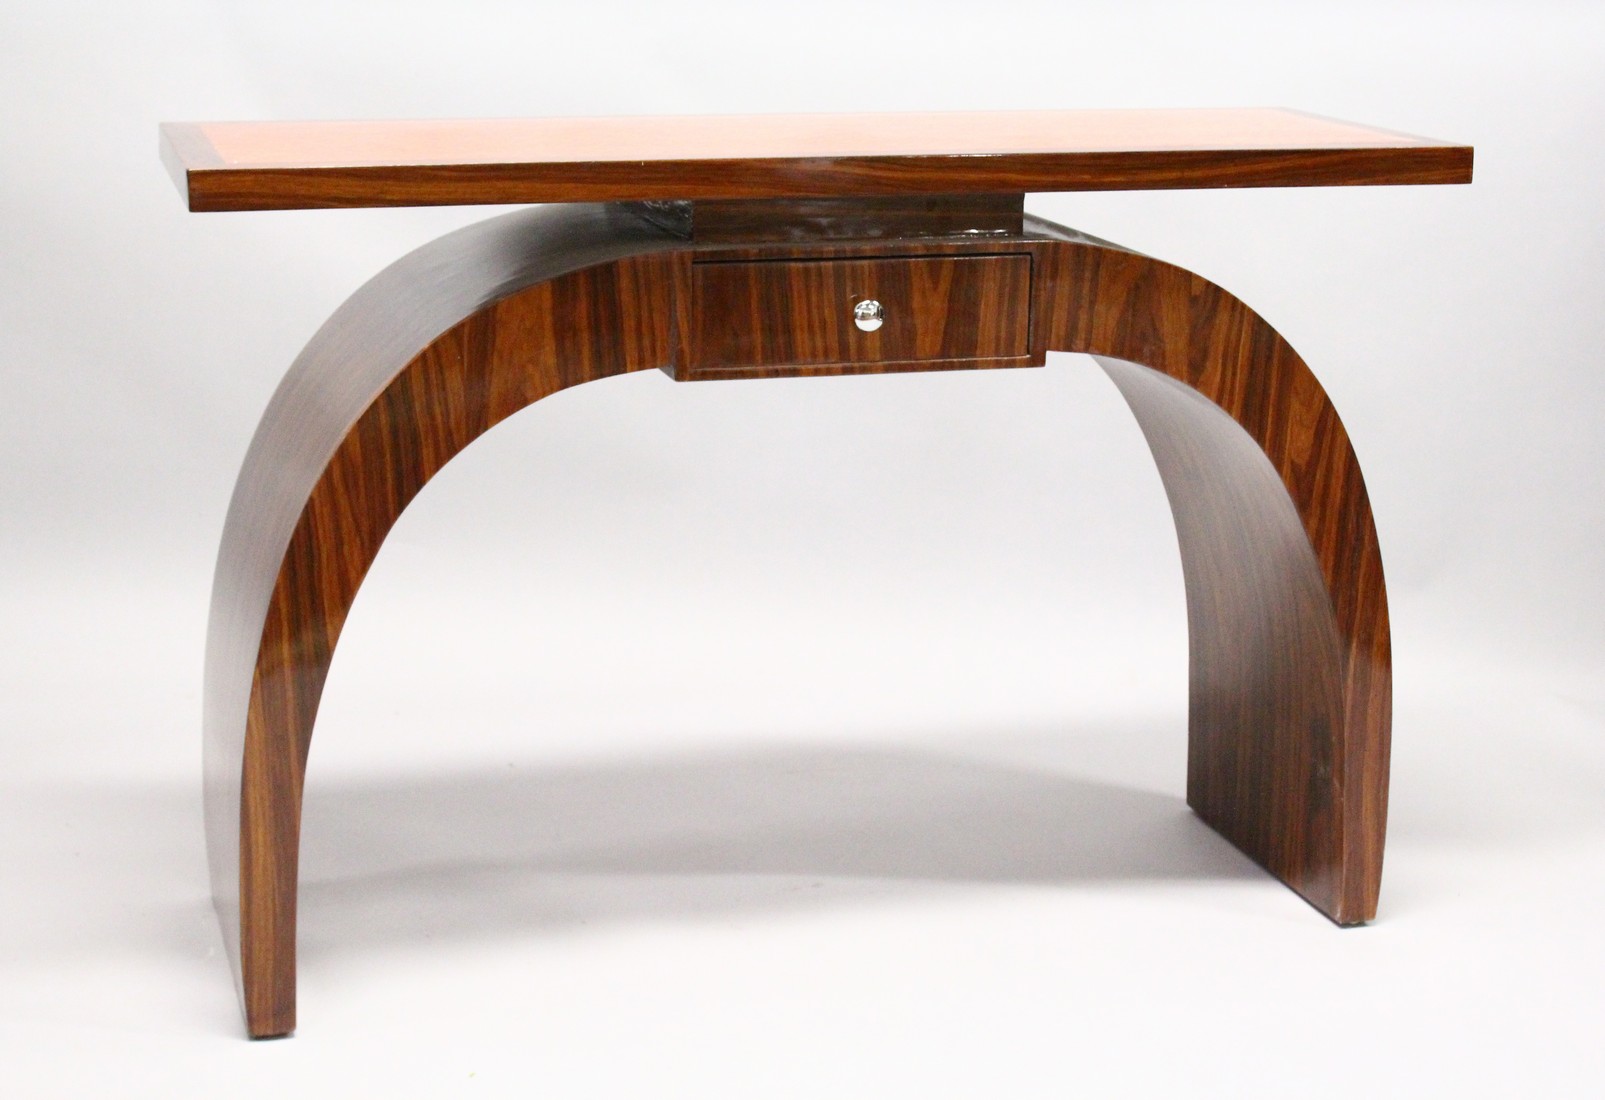 AN ART DECO STYLE ROSEWOOD CONSOLE TABLE, with a inlaid top, small drawer on curving supports 4ft